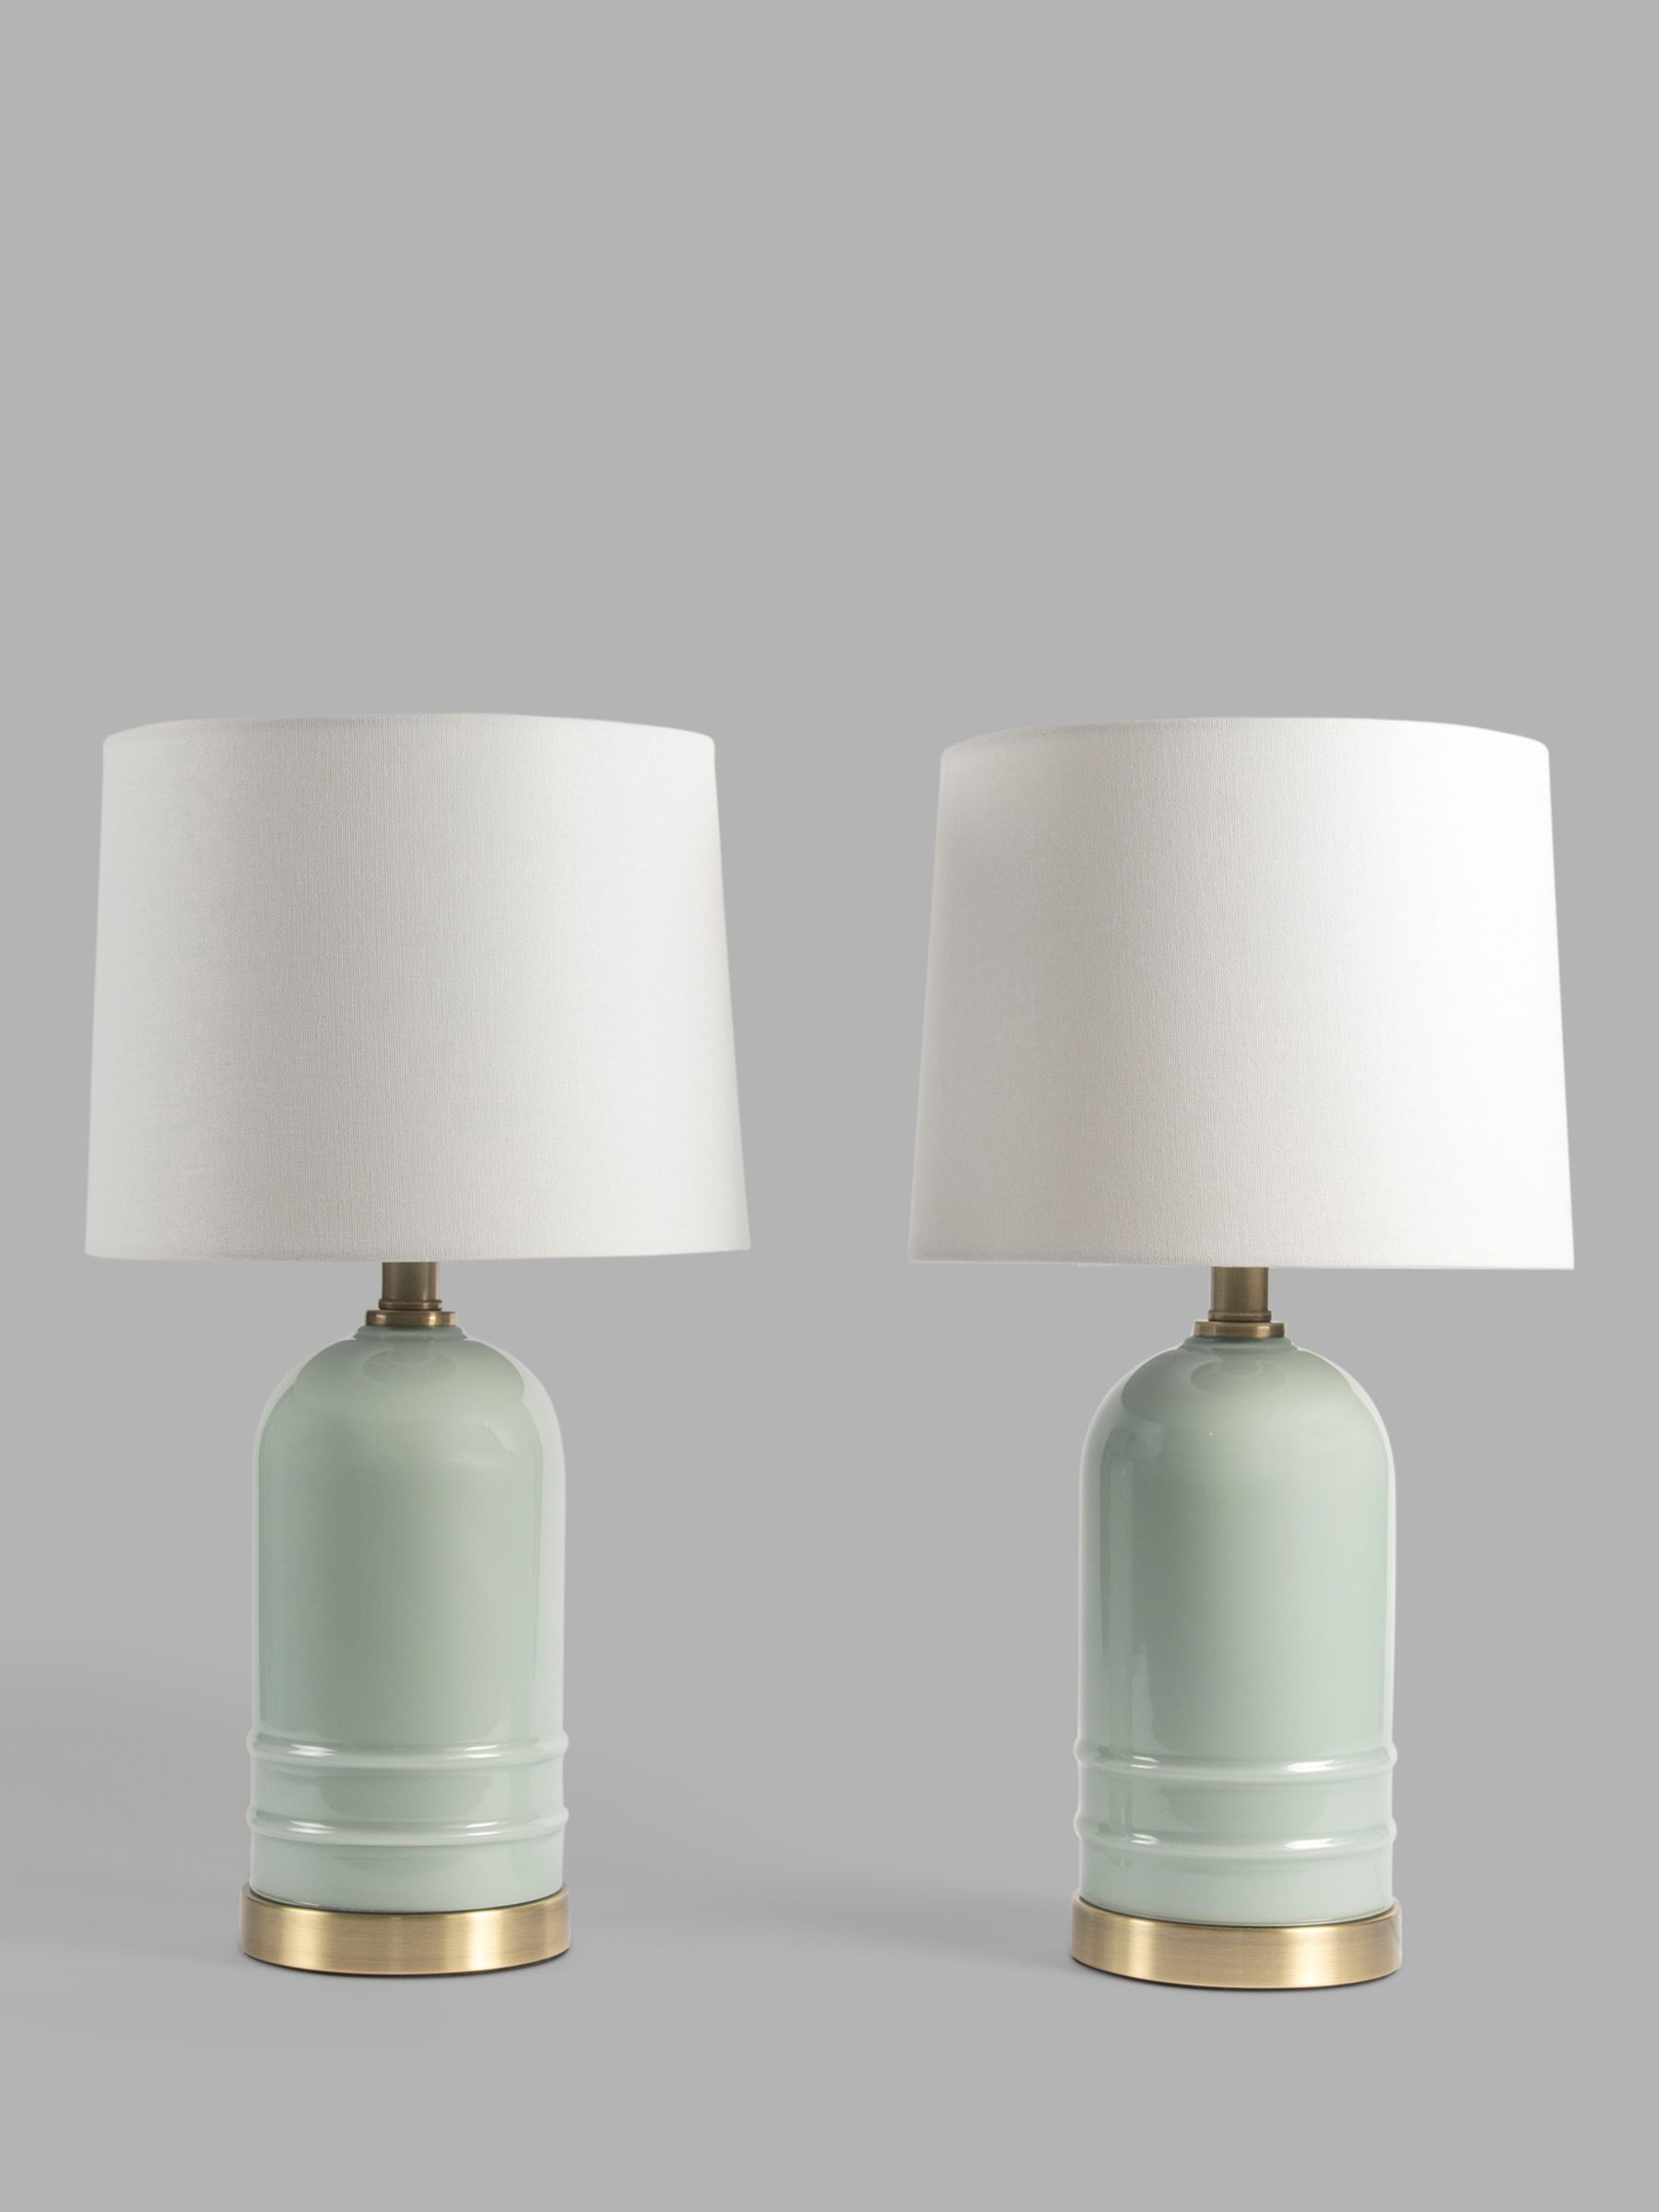 Photo of One.world clifton table lamps set of 2 off white